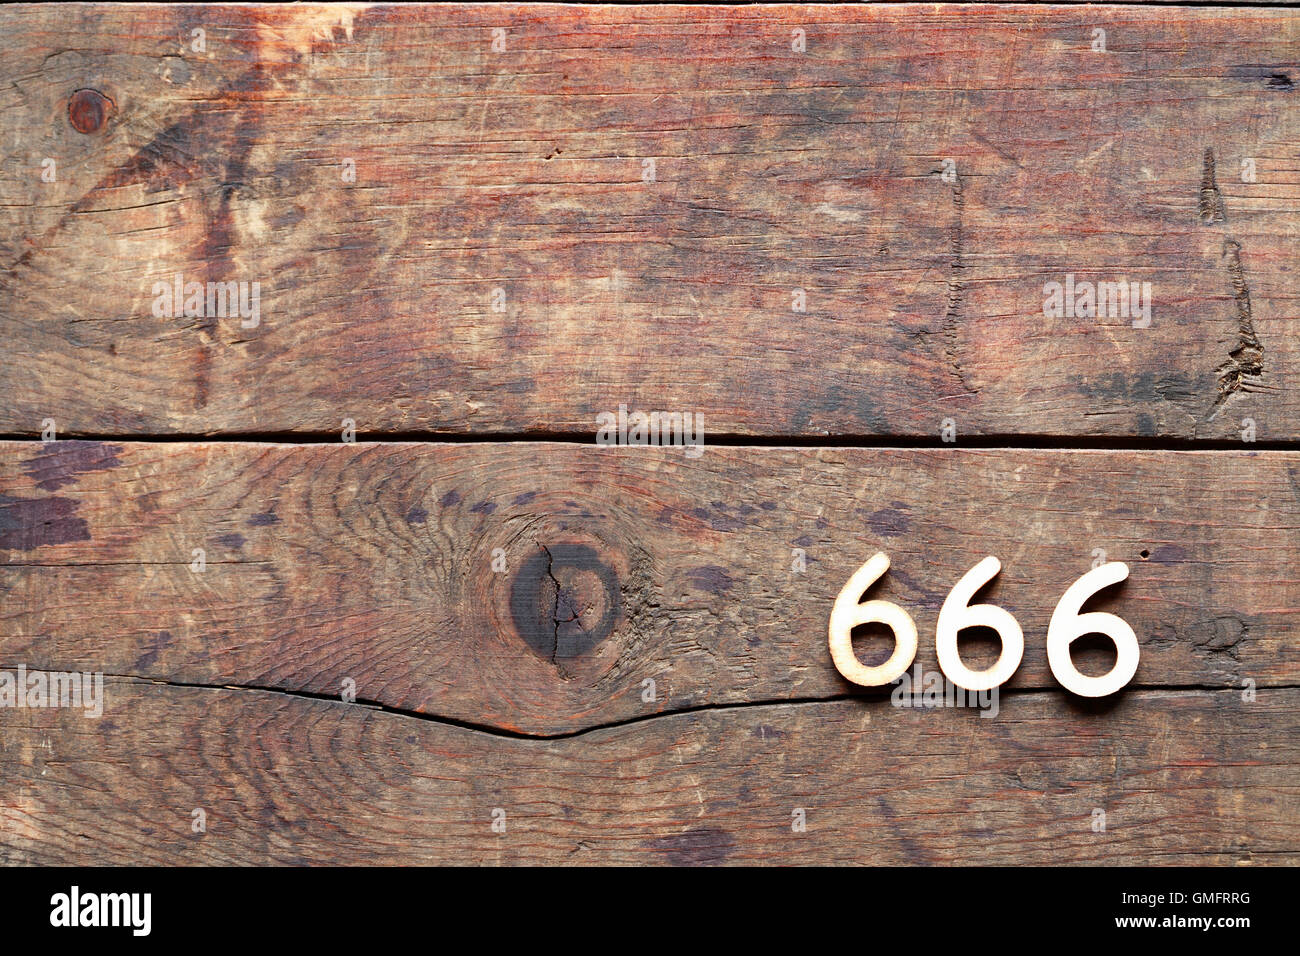 666 sign on old wooden background with free space Stock Photo